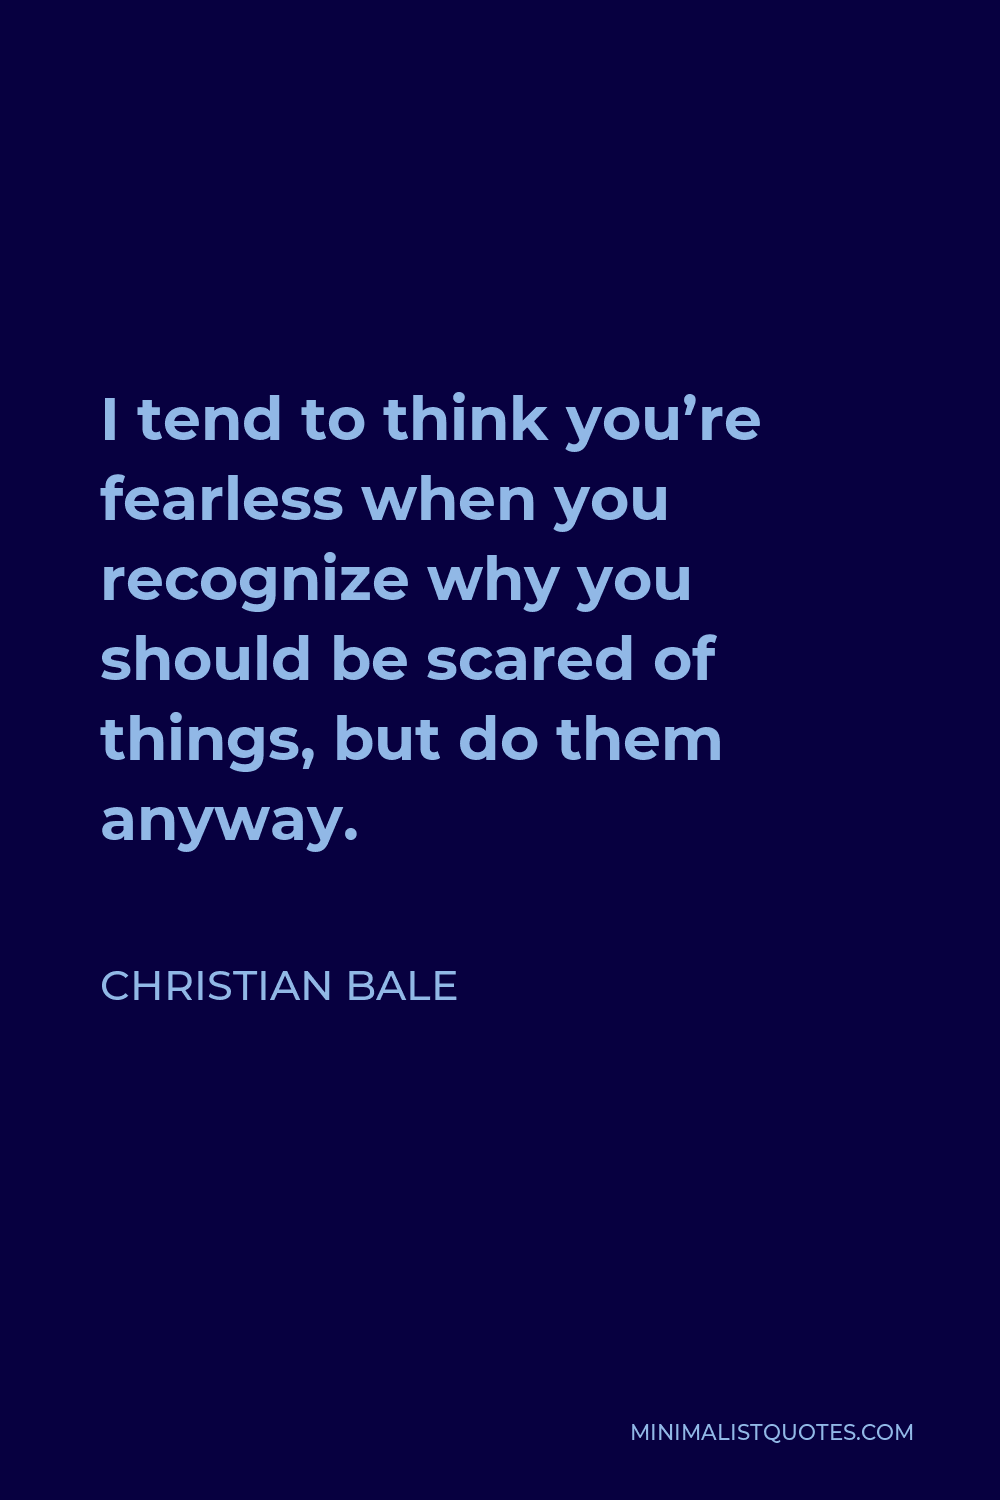 Christian Bale Quote - I tend to think you’re fearless when you recognize why you should be scared of things, but do them anyway.